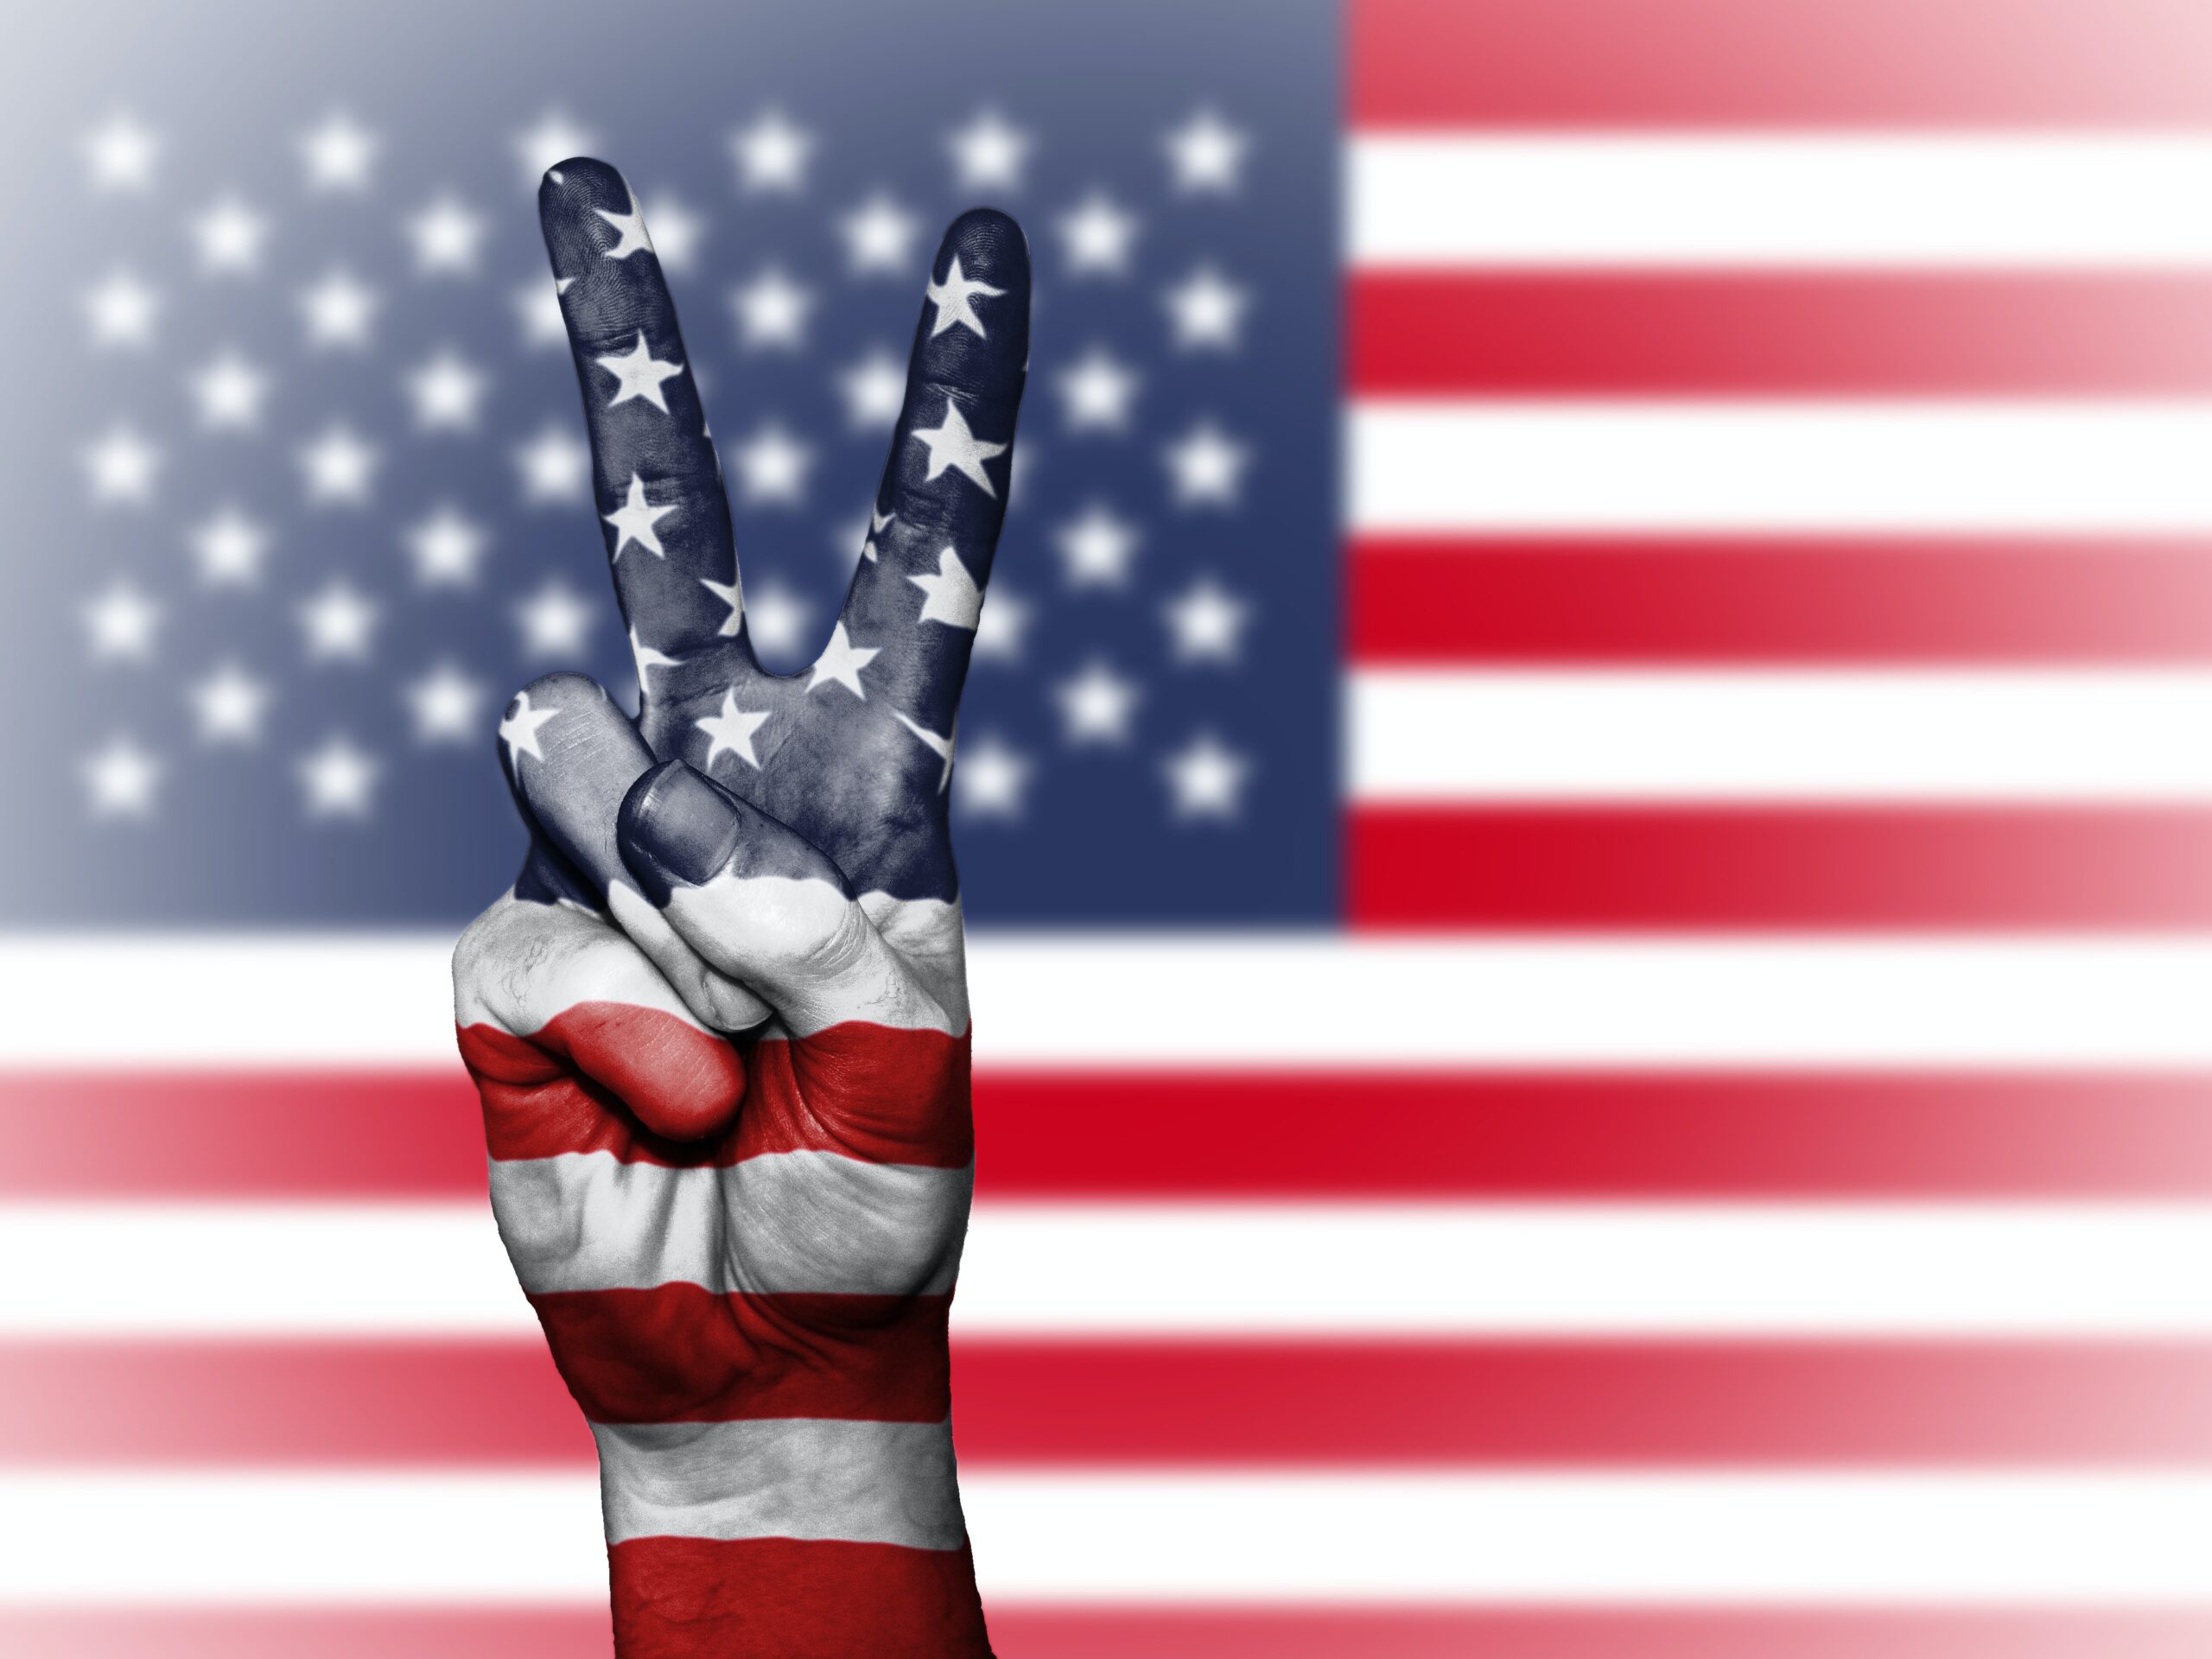 a person making the peace sign in front of an American flag